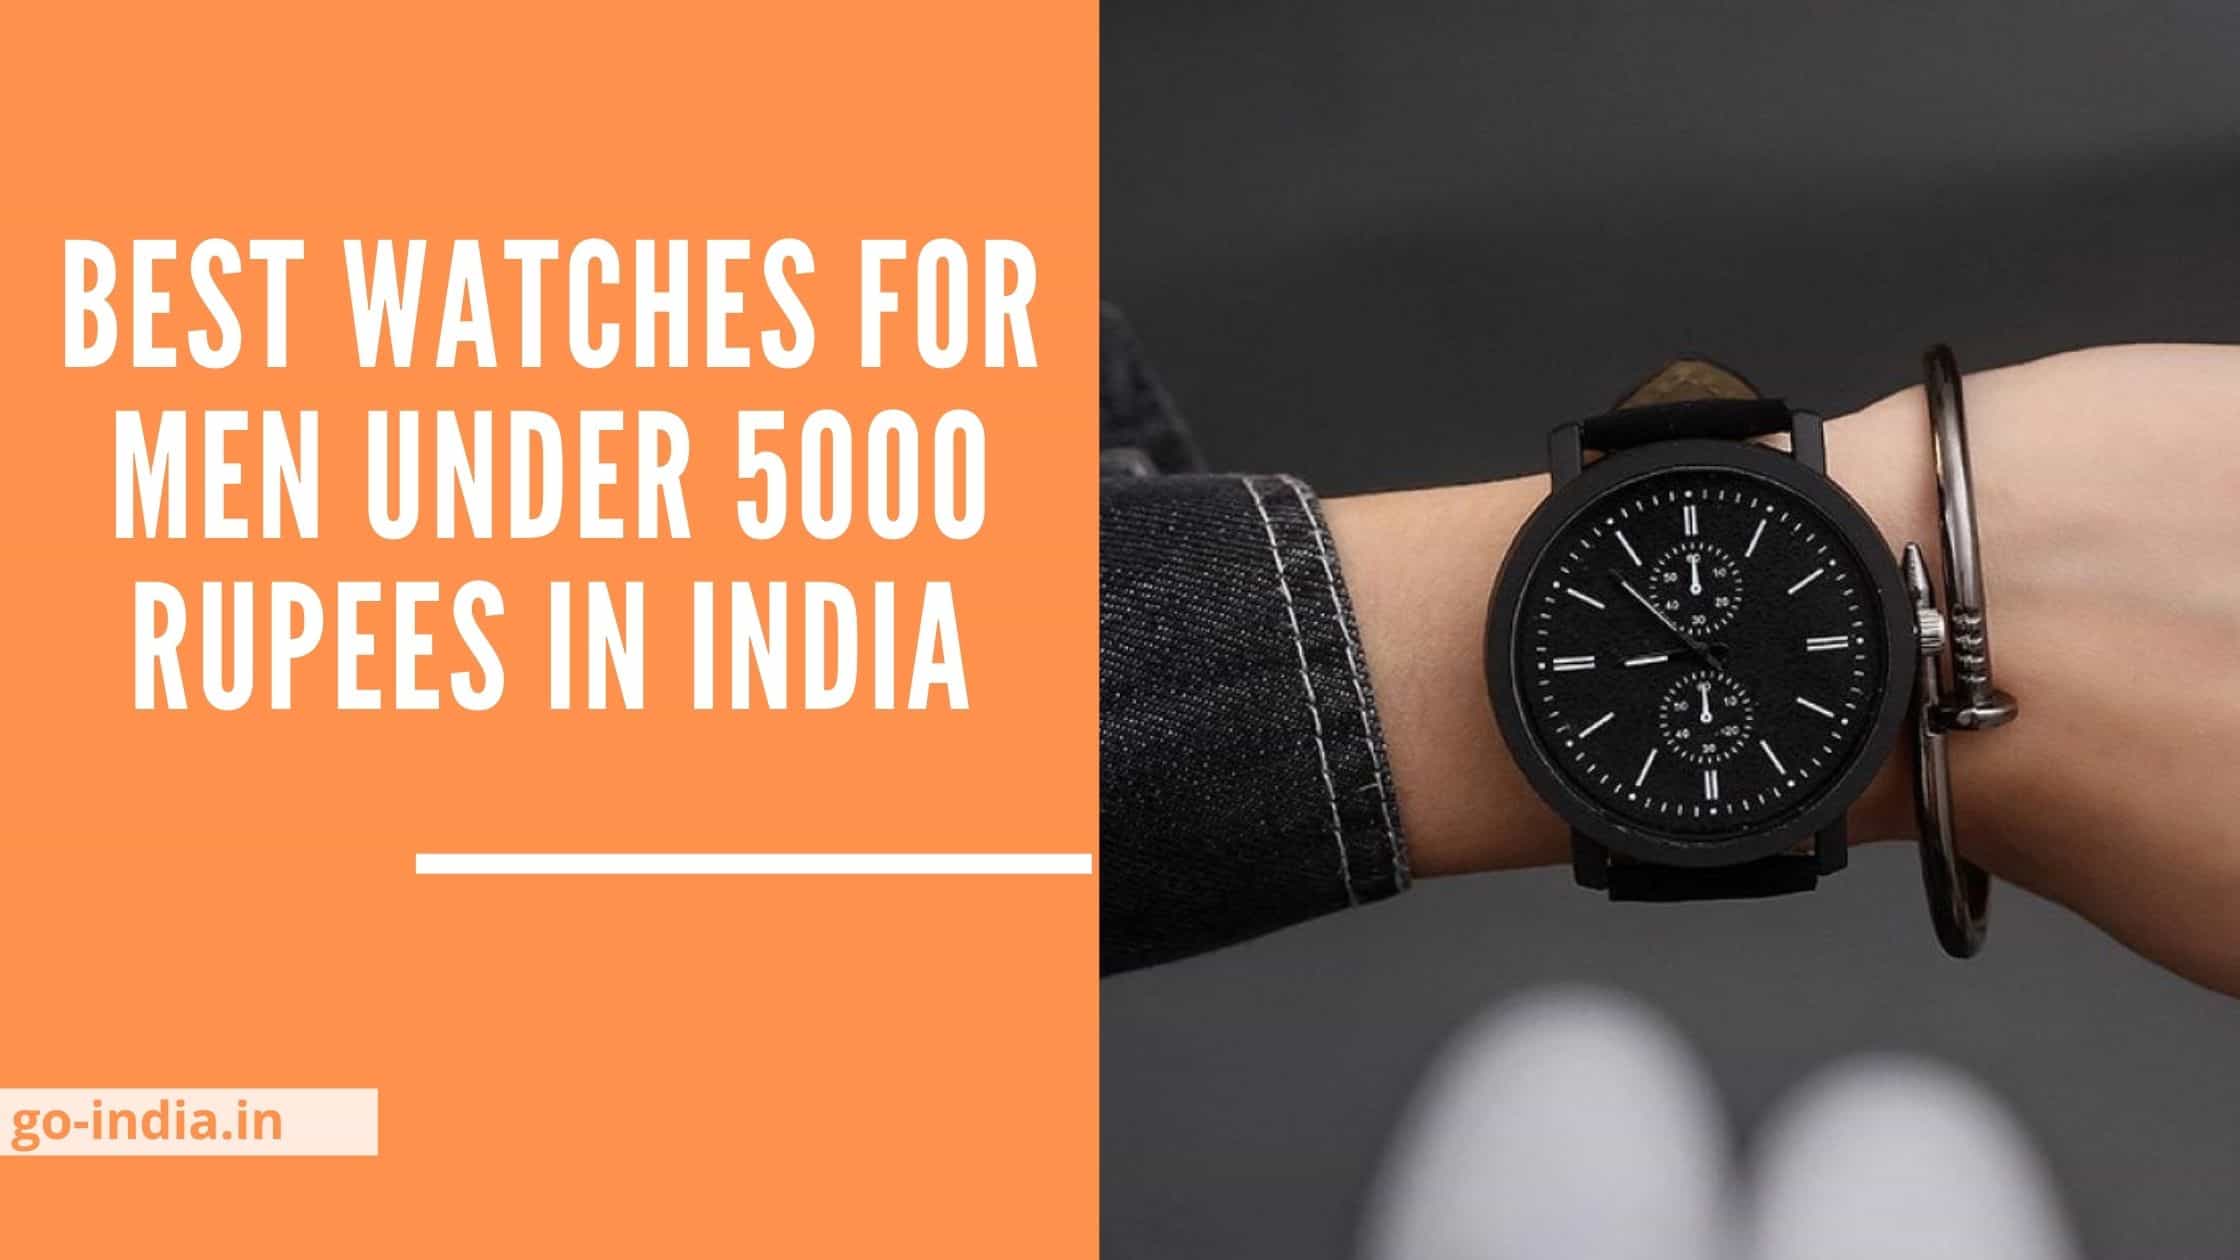 Best Watches for Men Under 5000 Rupees in India